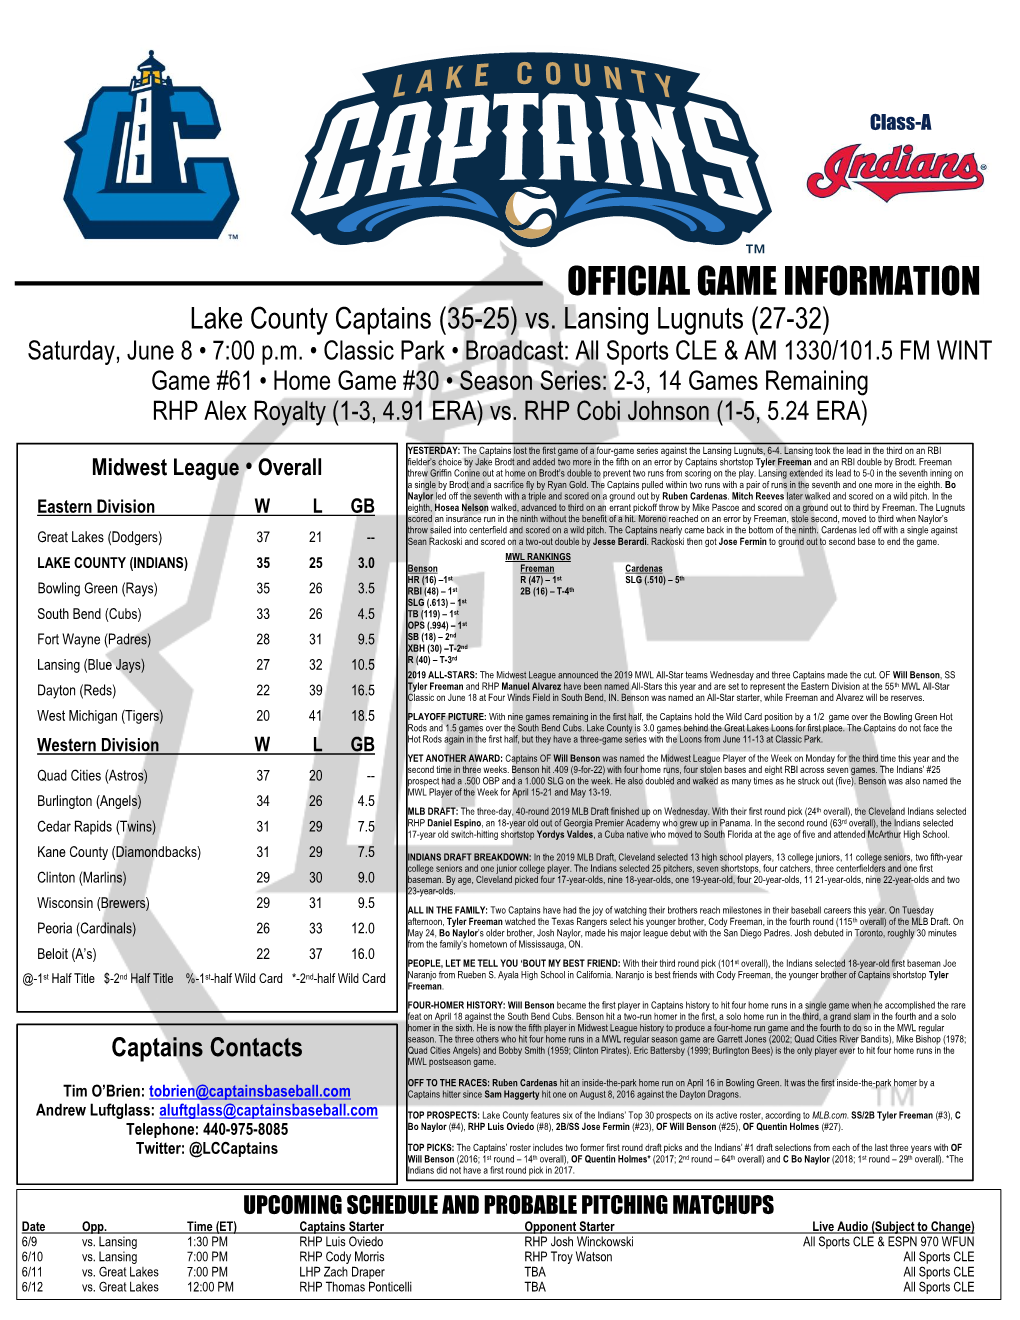 OFFICIAL GAME INFORMATION Lake County Captains (35-25) Vs